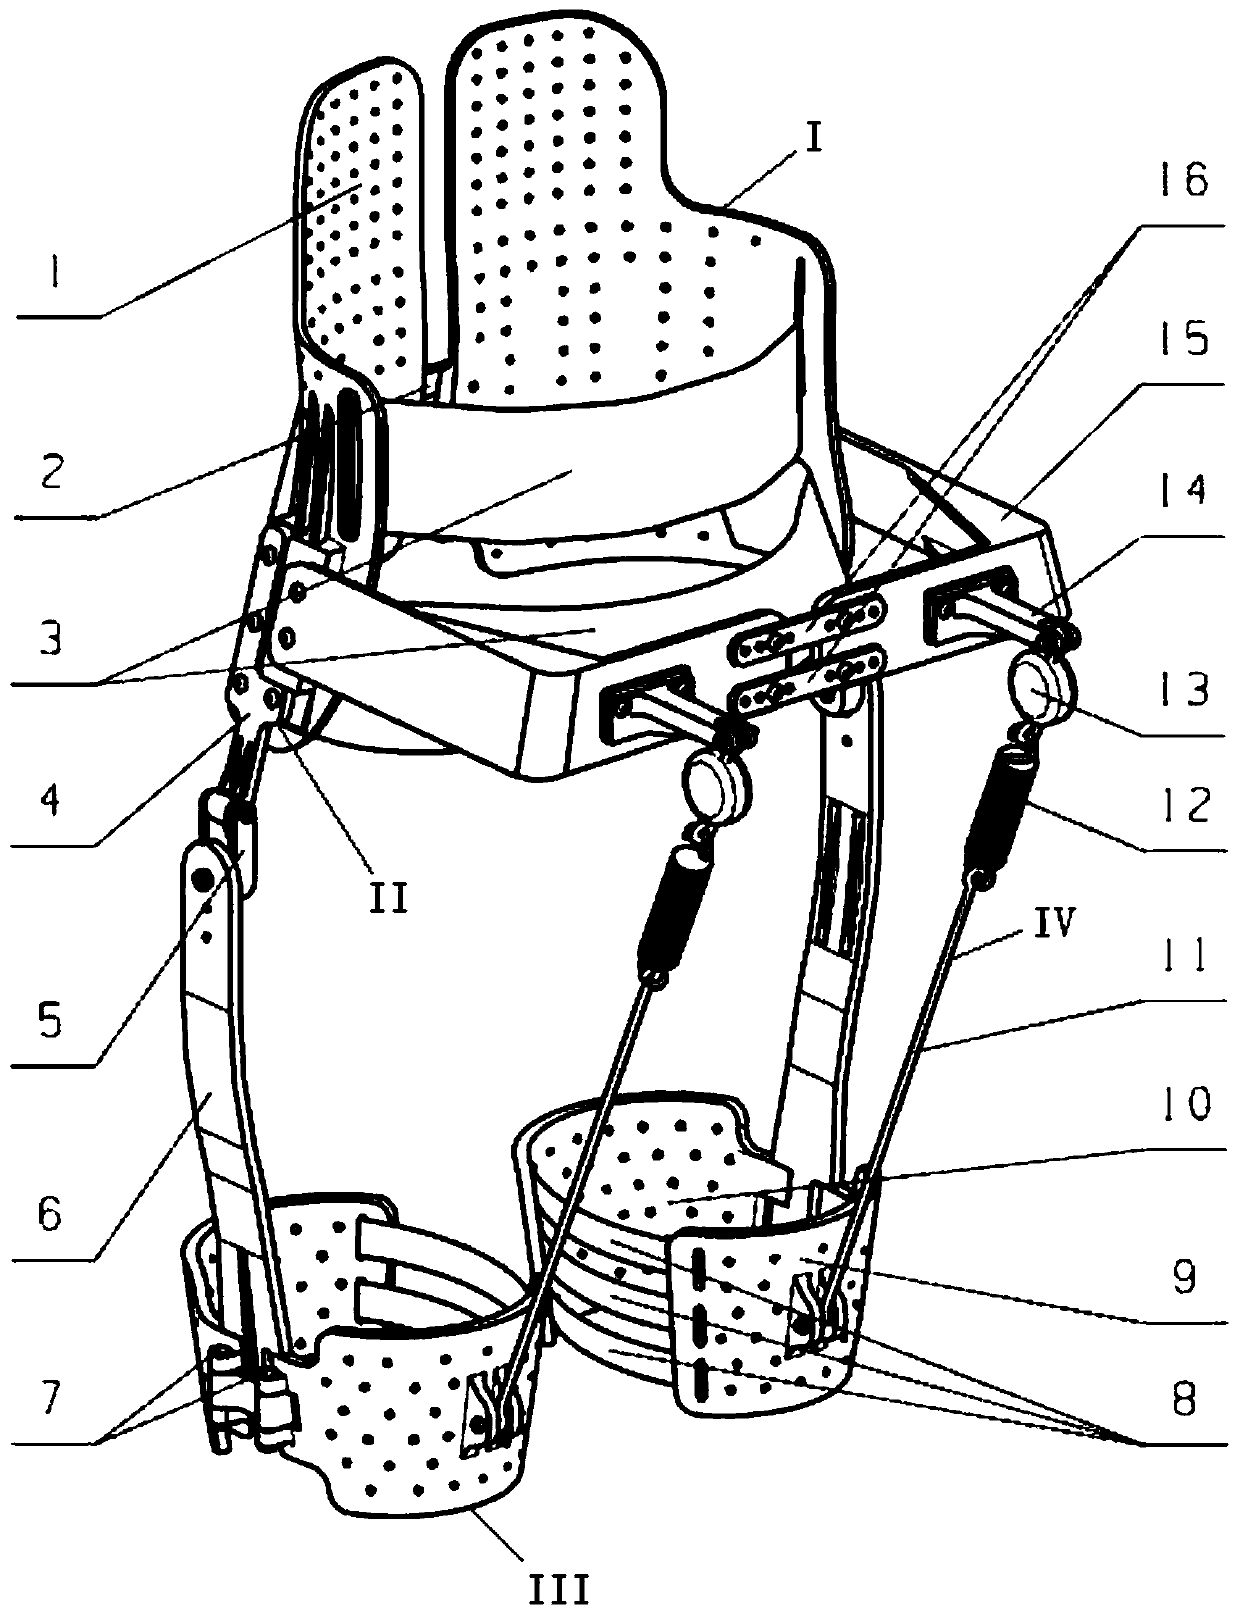 A hip joint passive exoskeleton device based on energy time-sharing regulation